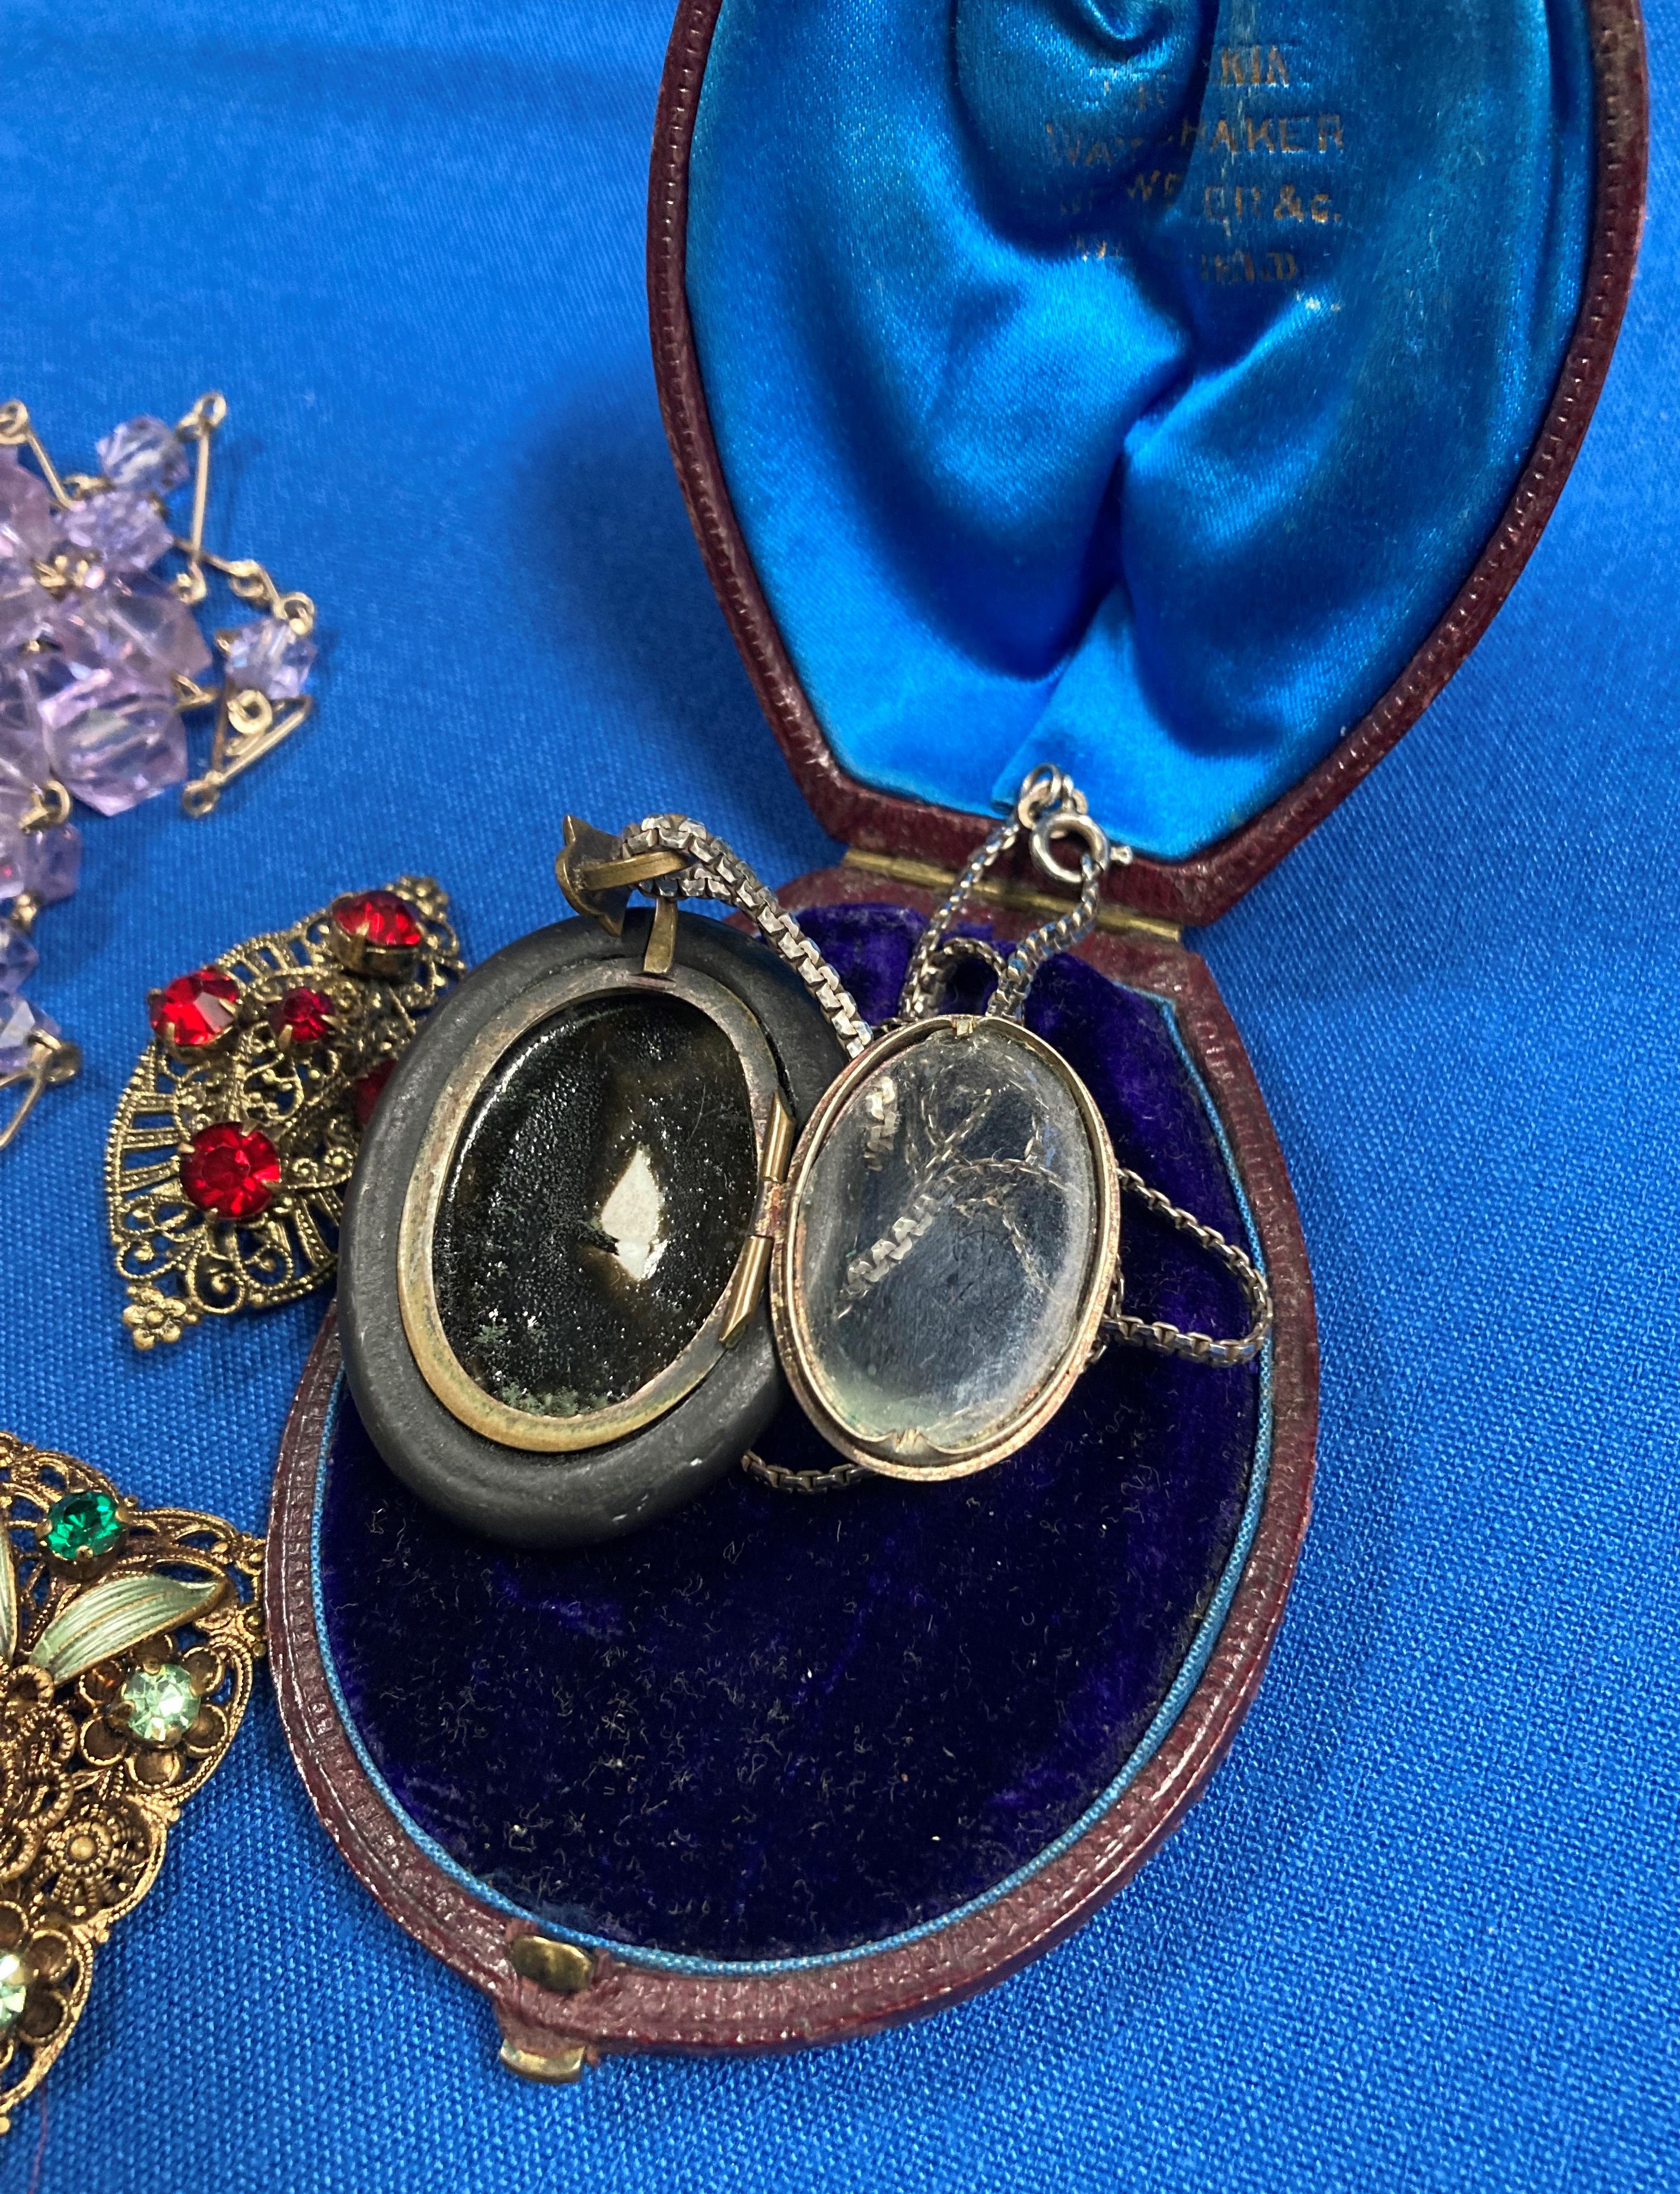 Contents to bag - a vintage black locket with floral design with a sterling silver (. - Image 2 of 3